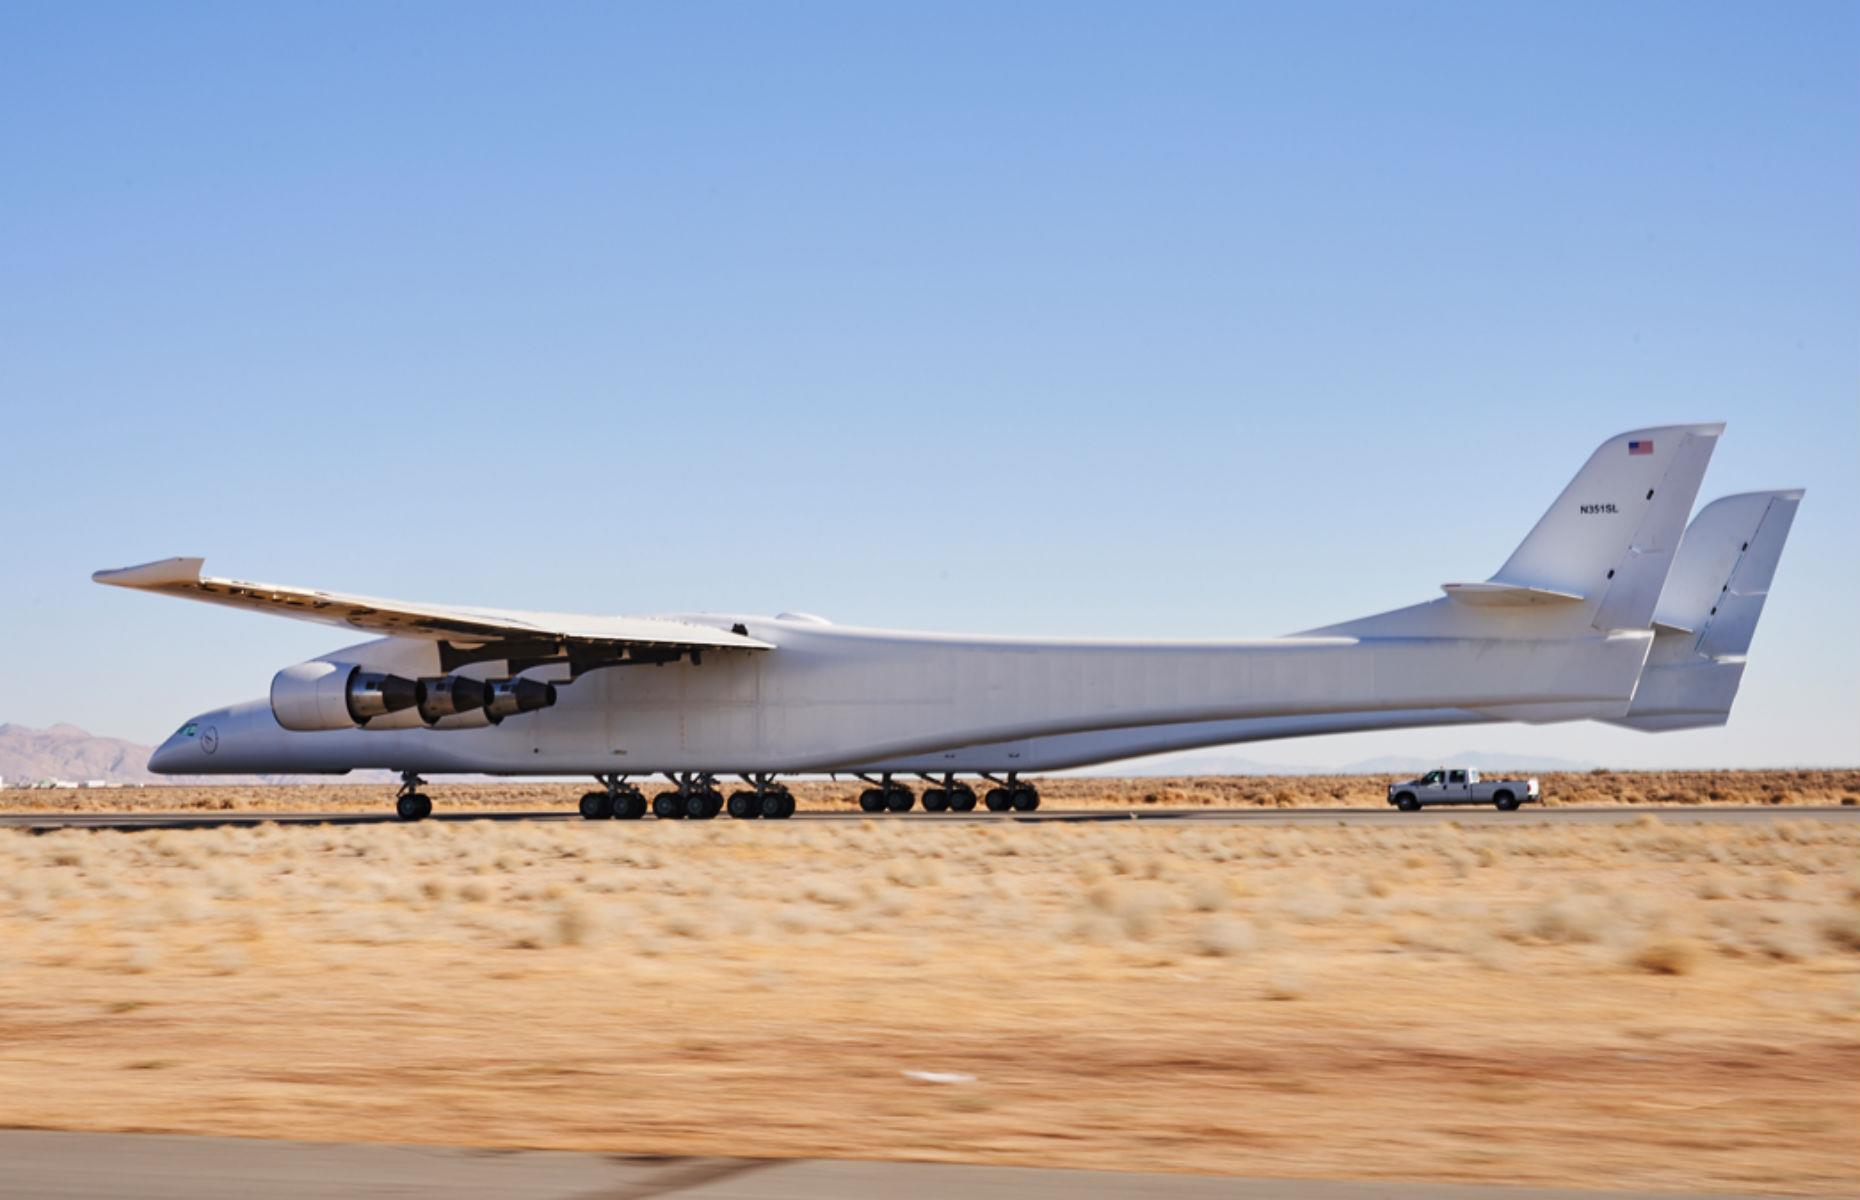 <p>Allen, who died in 2018, said that he had been intrigued by space exploration ever since Yuri Gagarin became the first man in space in 1961, and was "determined to...help maximize the potential of space to improve life here on Earth." Rather than transporting passengers, the Stratolaunch is designed to carry rockets to the cruising altitude of commercial aircraft, and then launch them into space from there.</p>